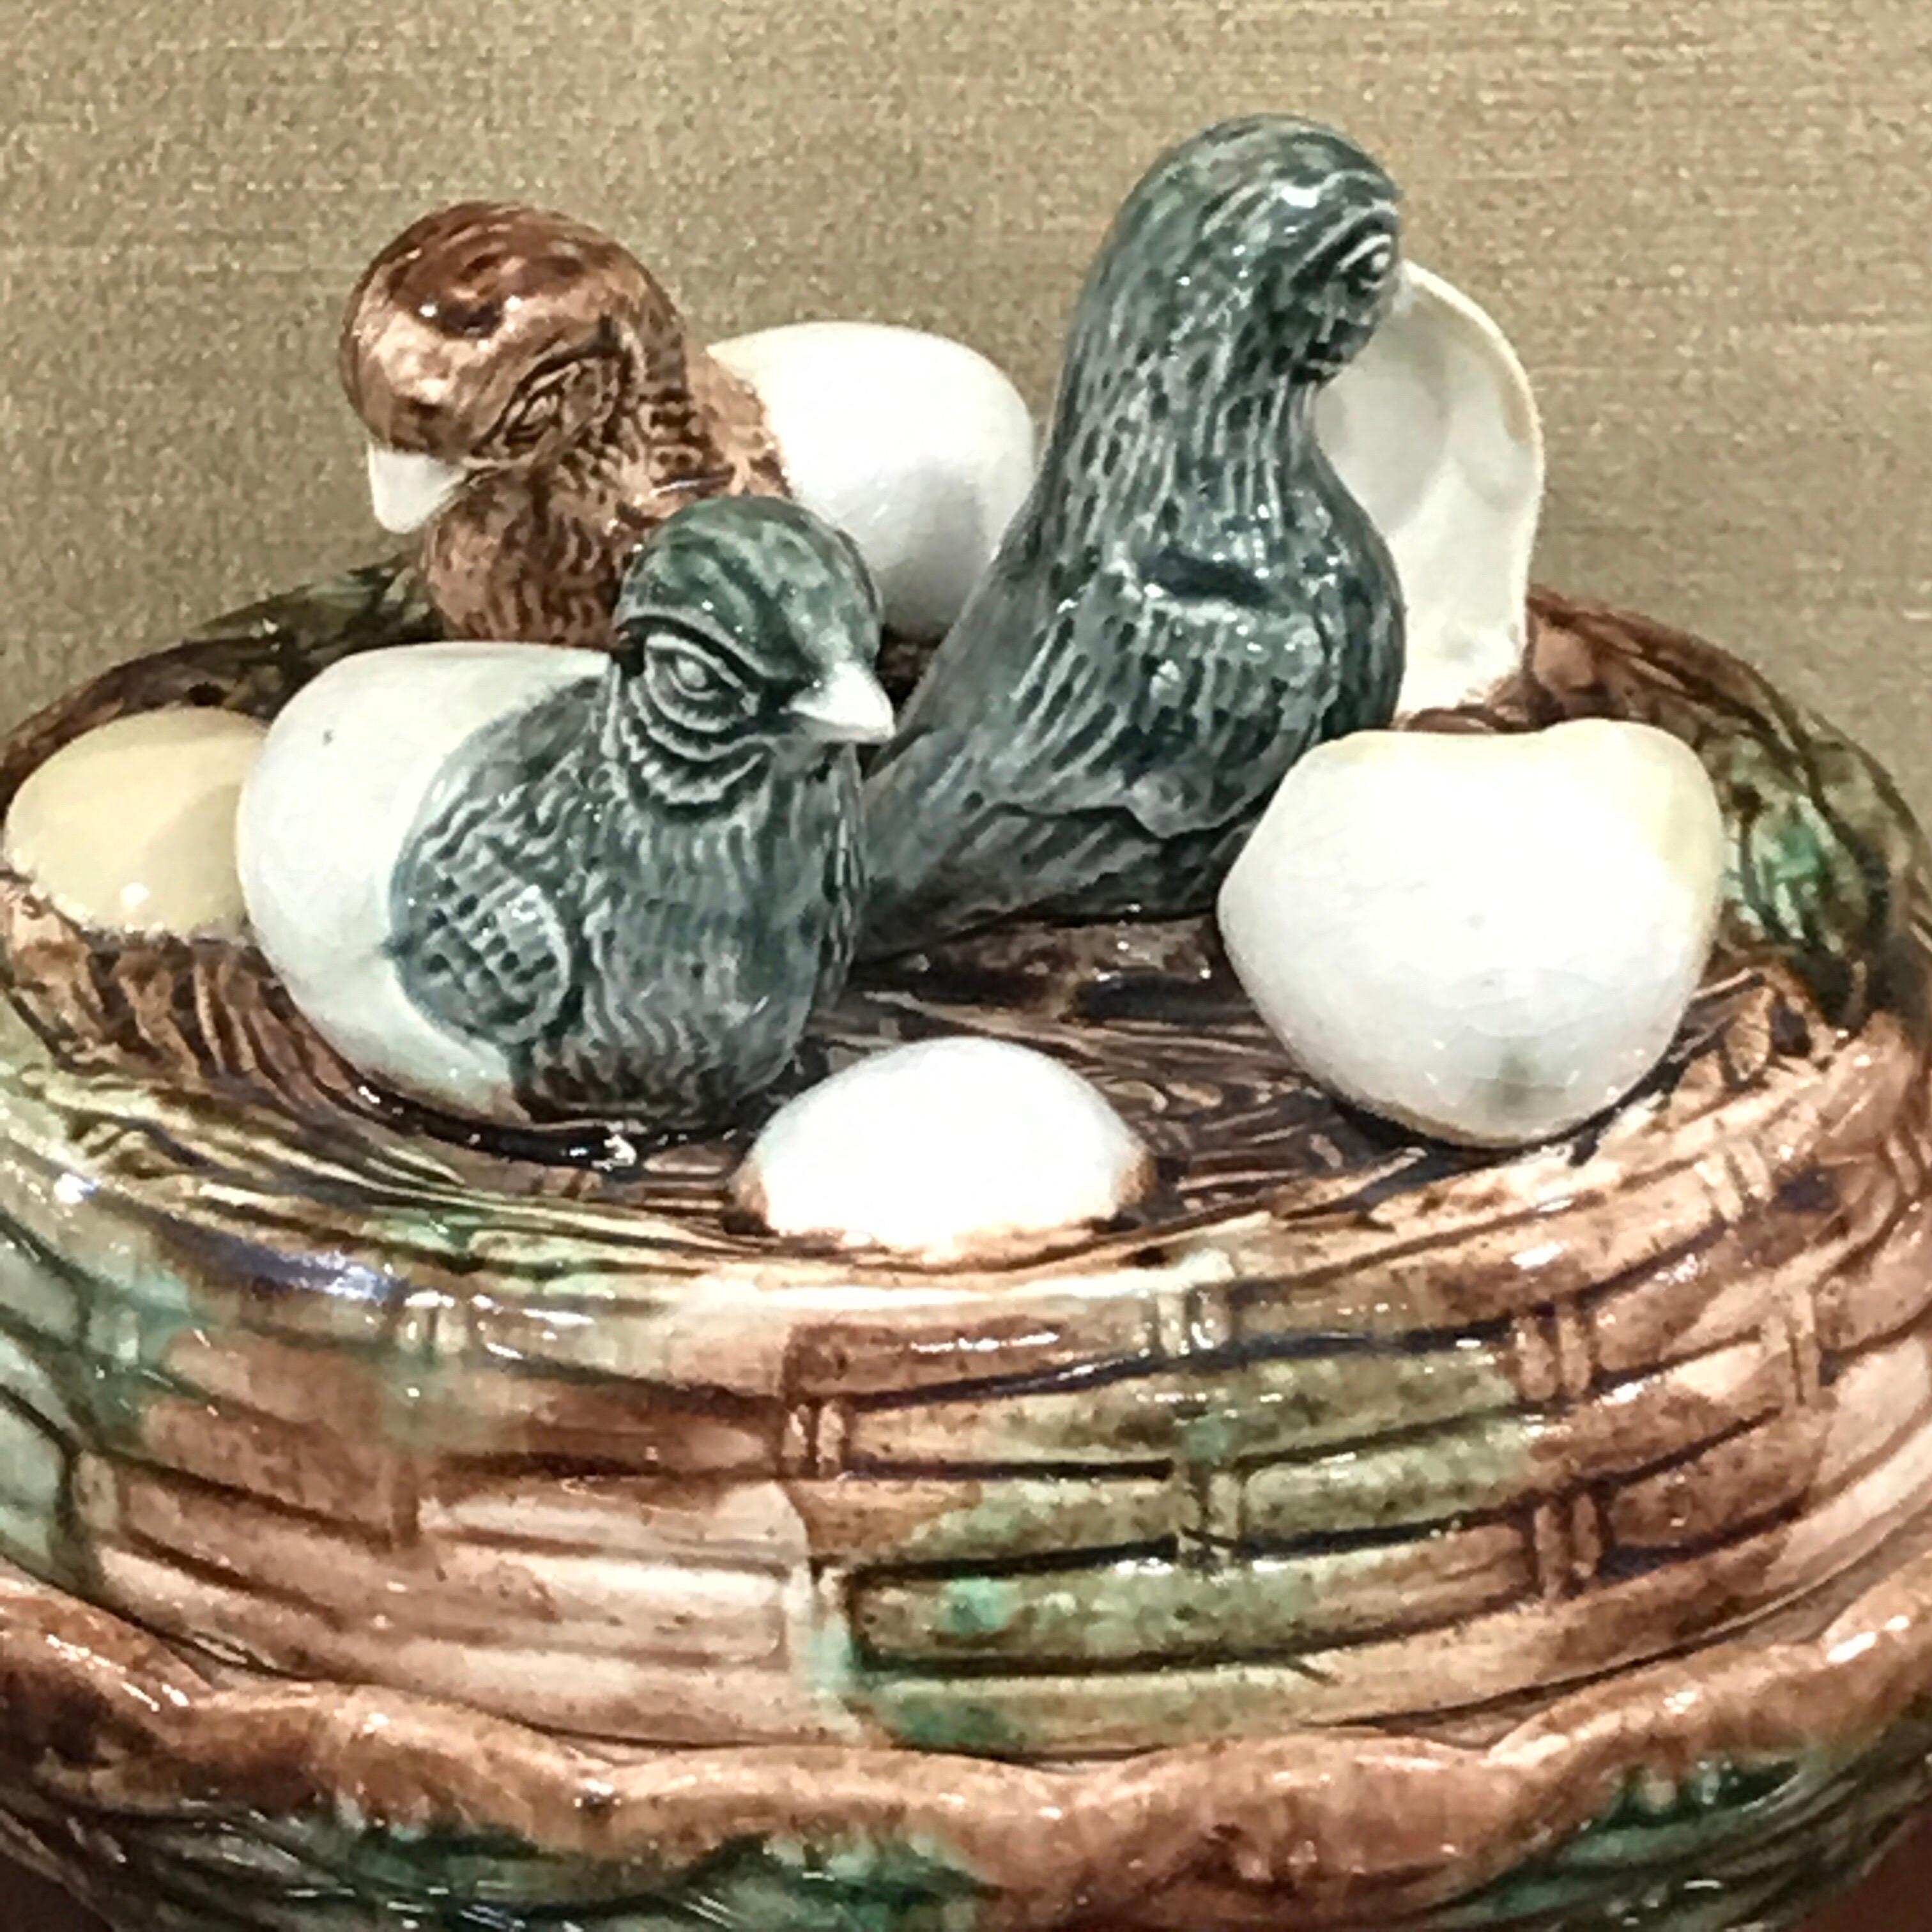 English Majolica game dish, hatchling's on nest, with three hatchling chicks on a realistically modeled two-piece nest tureen.